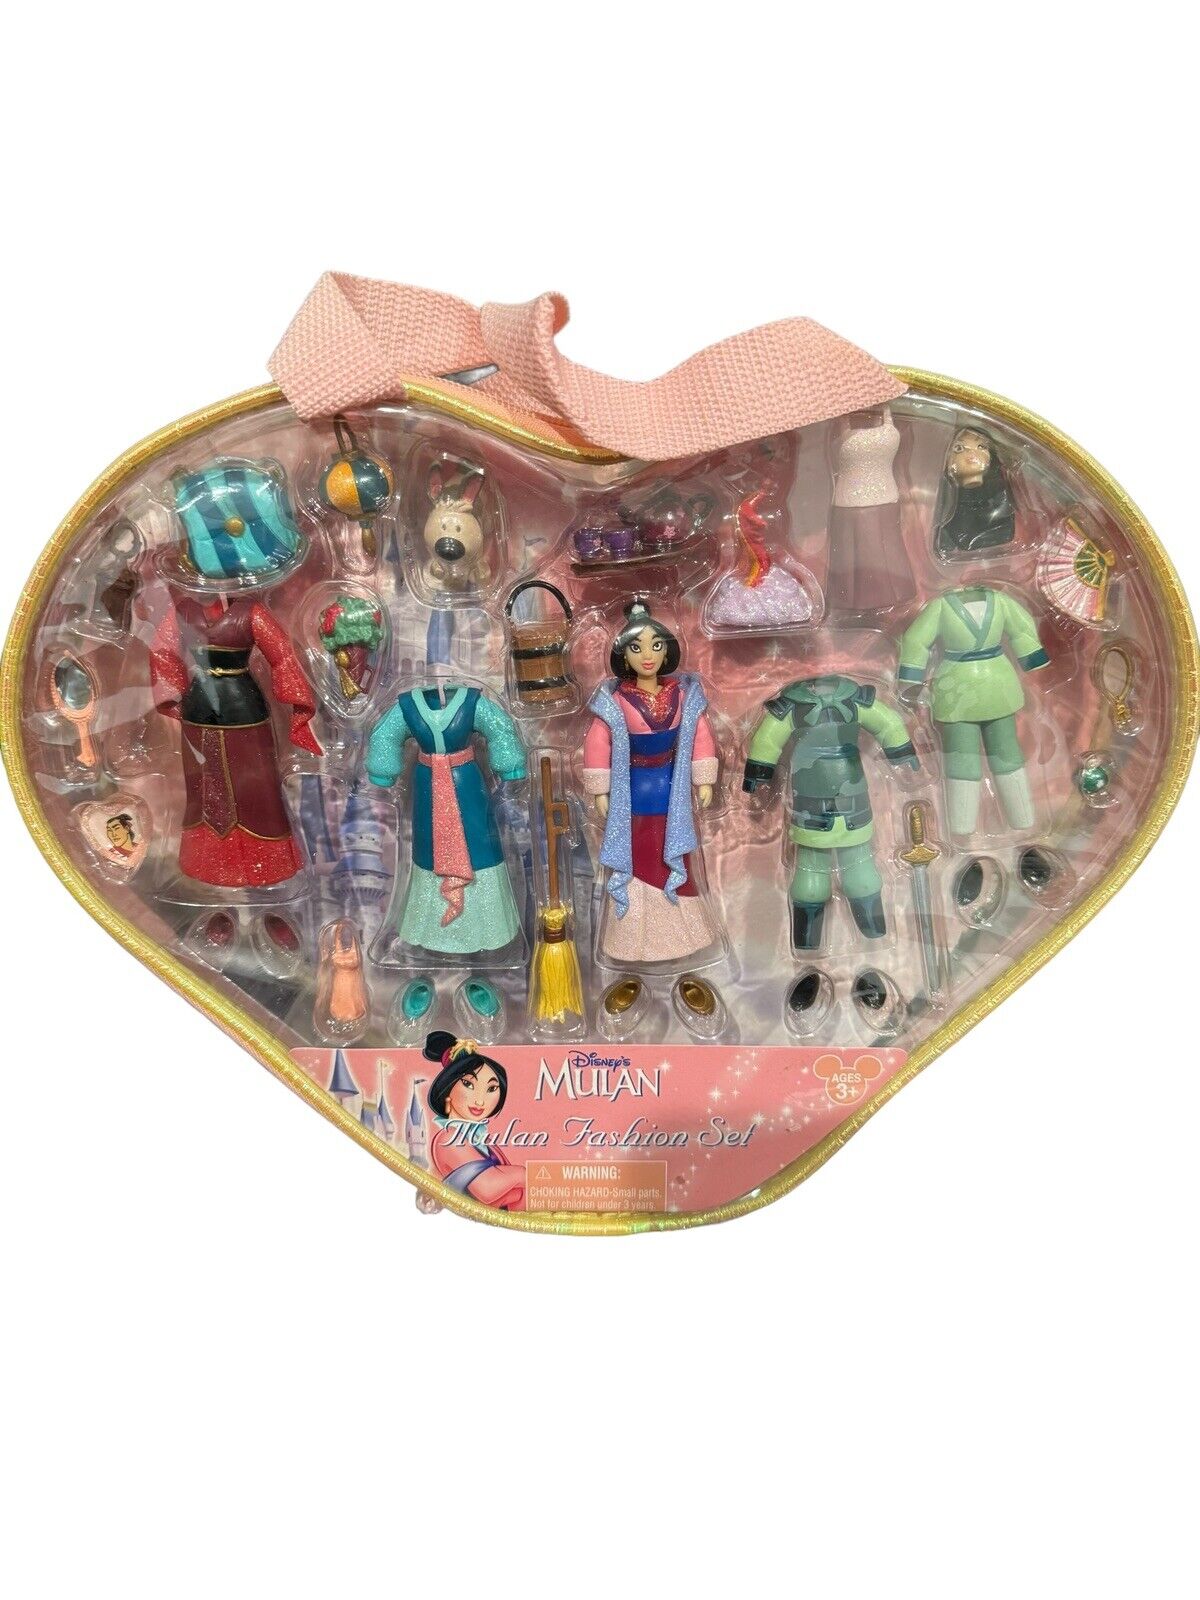 Disney - Mulan Figure Fashion Set with Carrying Case, Polly Pocket Style Rare